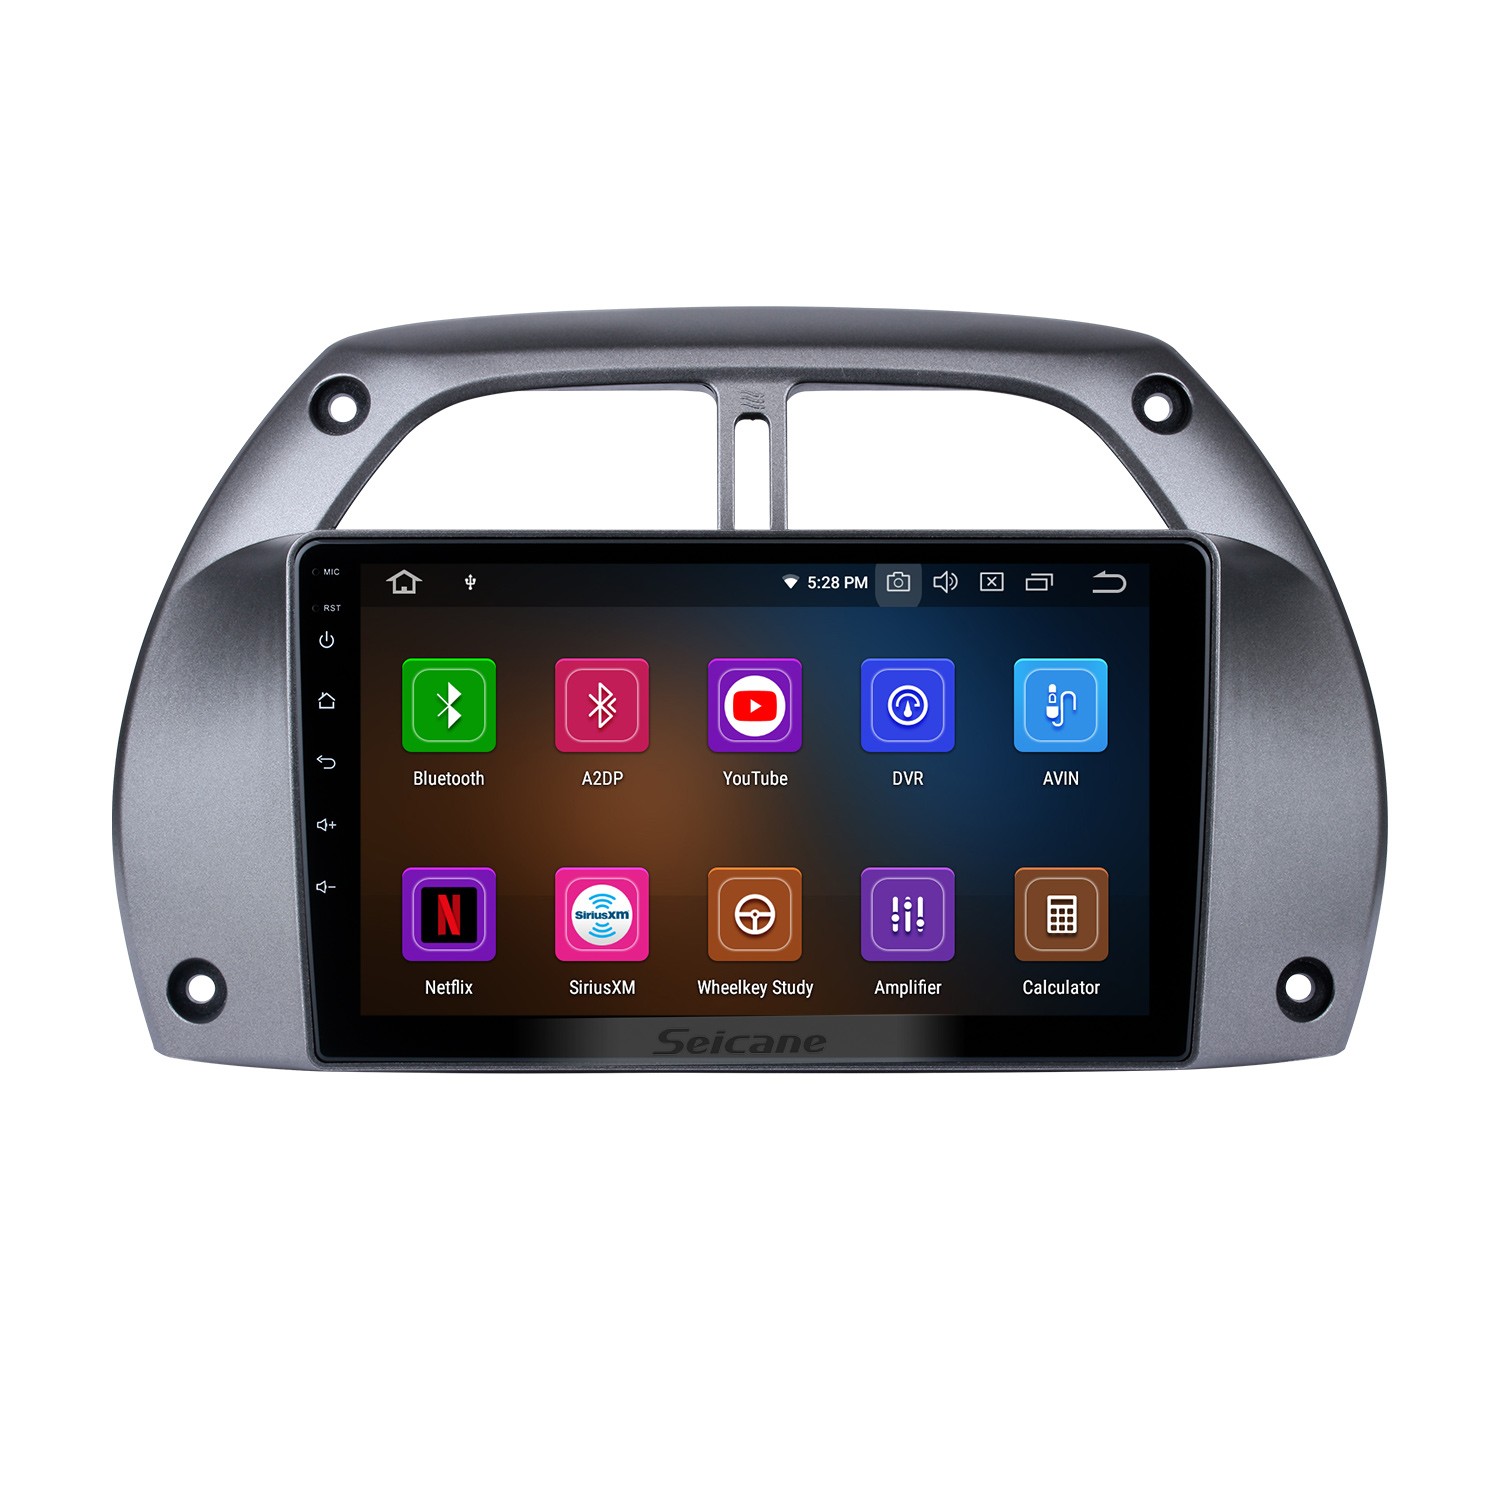  Hikity 9 Android 11 Car Stereo for Toyota RAV4 2001 2002 2003  2004 2005 2006 Wireless Carplay Android Auto GPS Navigation Stereo WiFi RDS  Bluetoot Radio with 2GB Ram 32GB ROM : Electronics